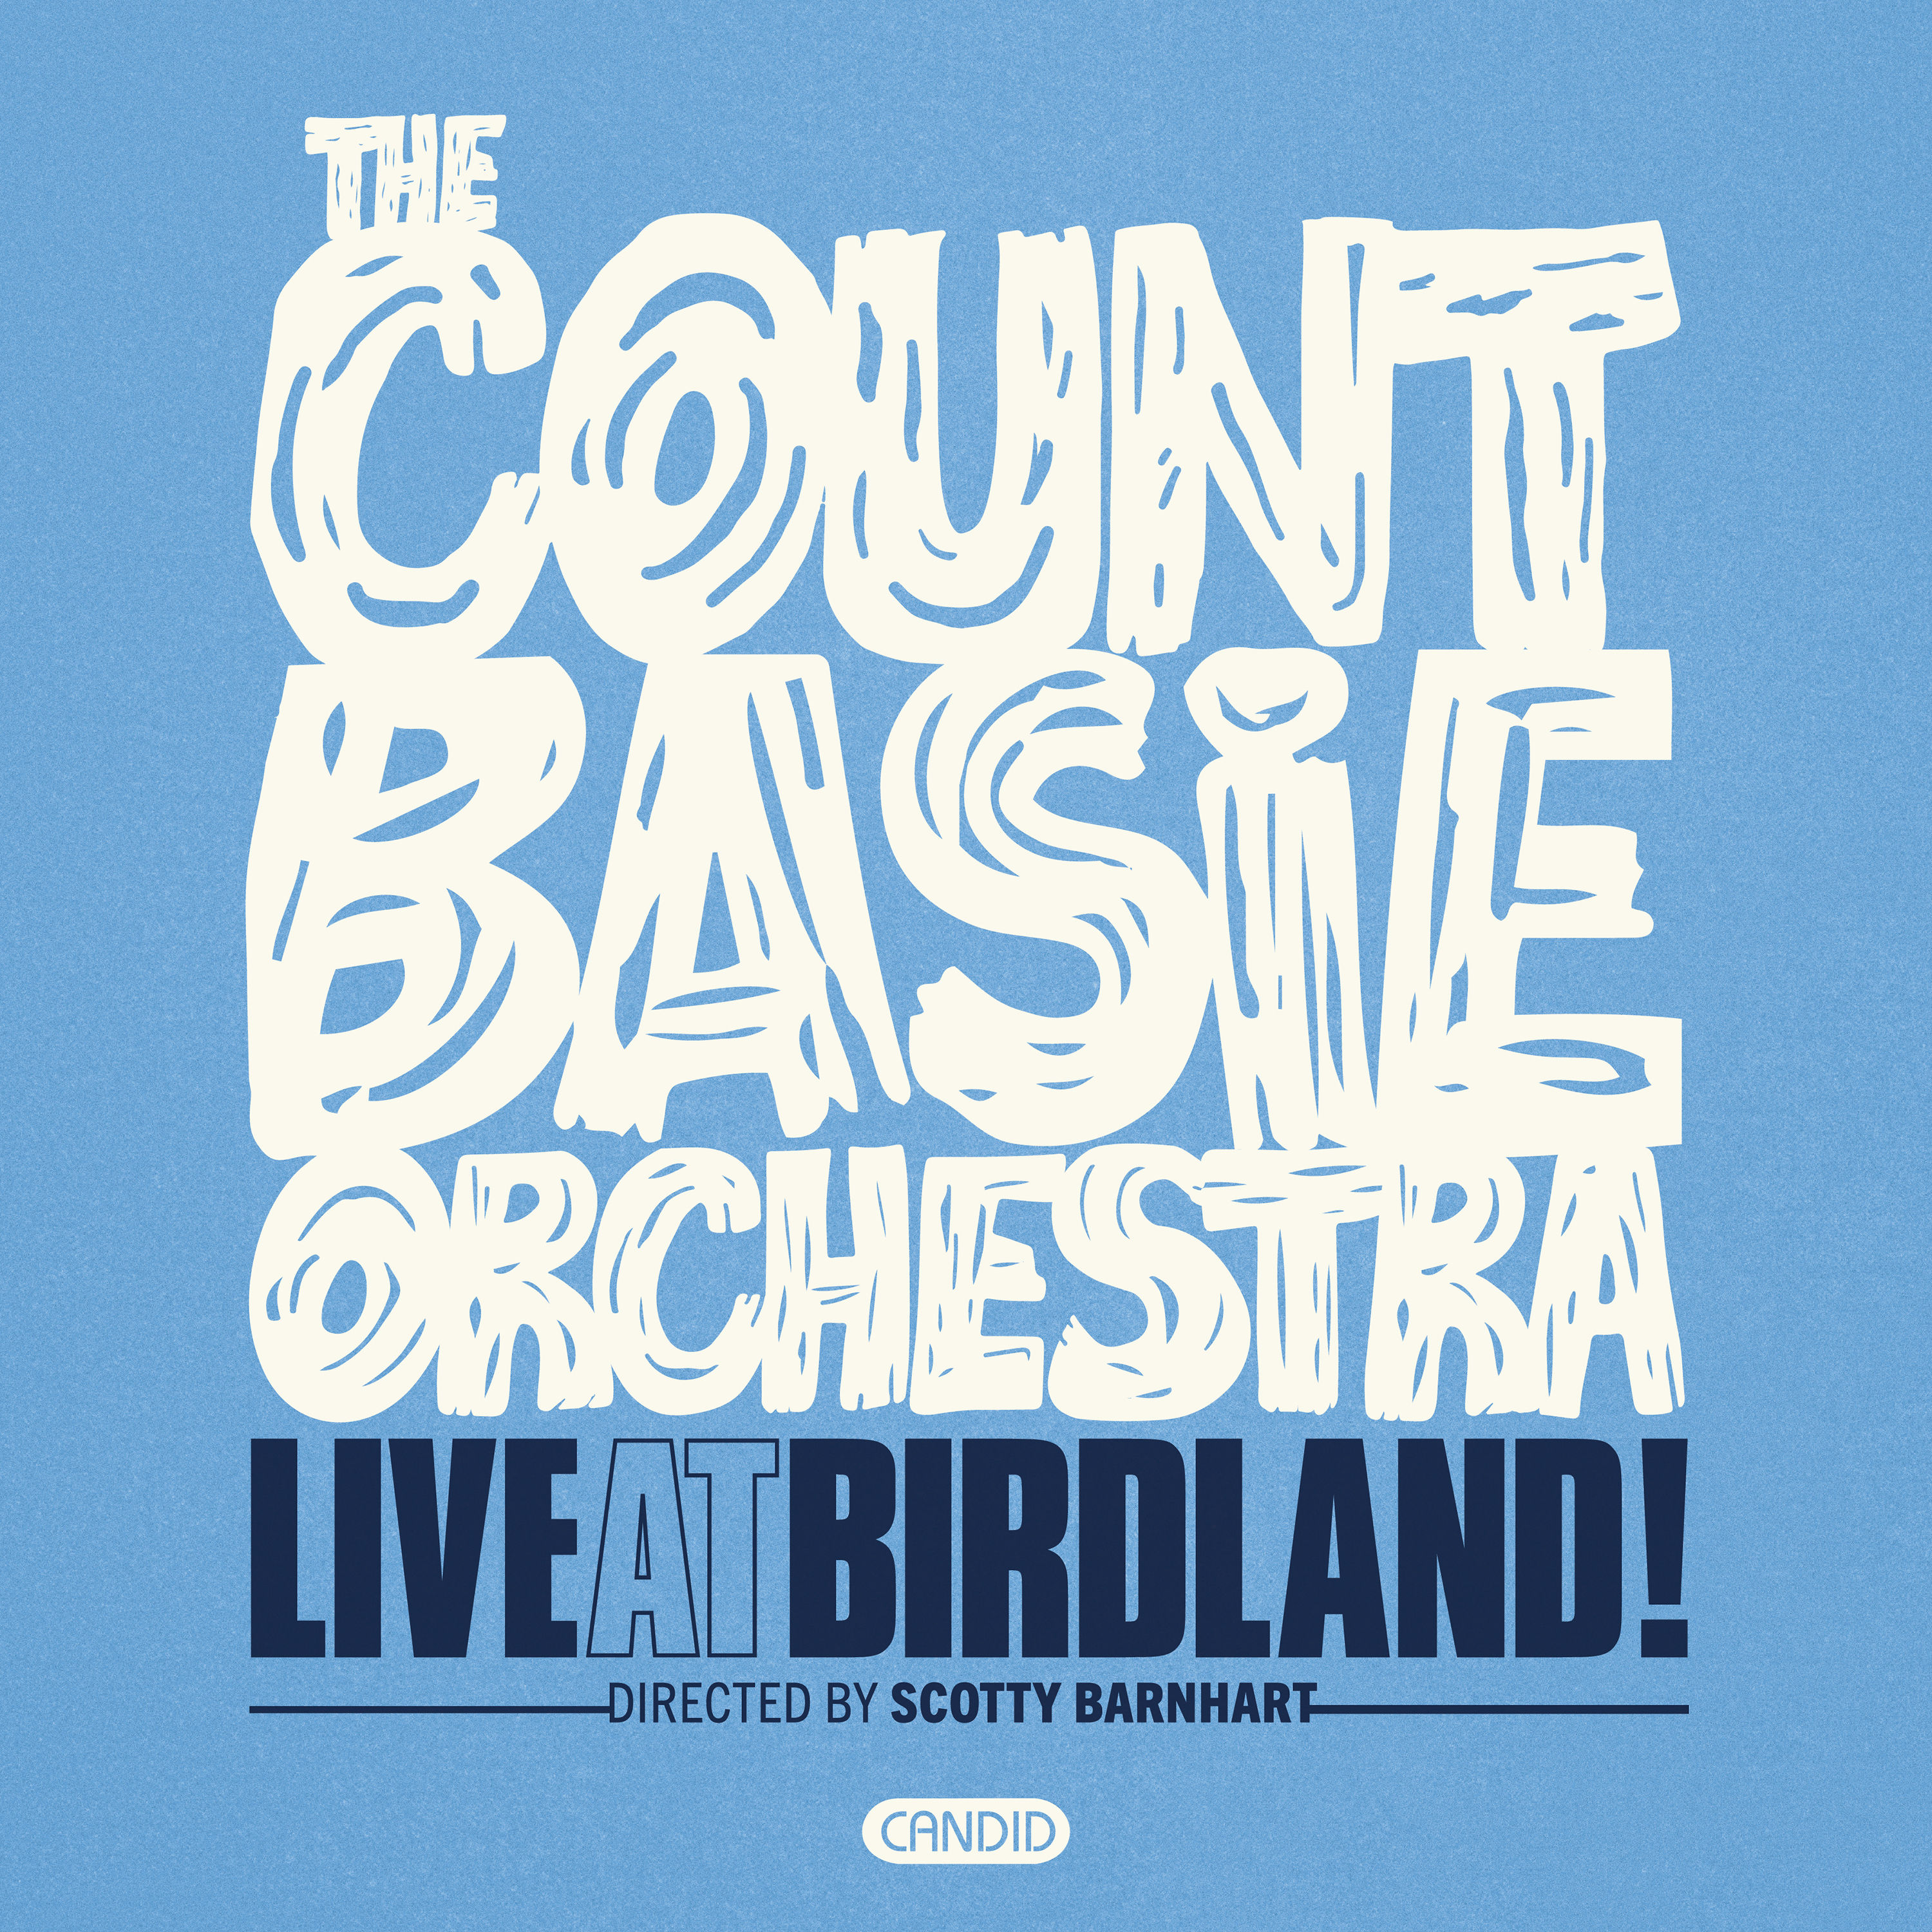 The Count Basie Orchestra - Live At Birdland (2021) [FLAC 24bit/96kHz]